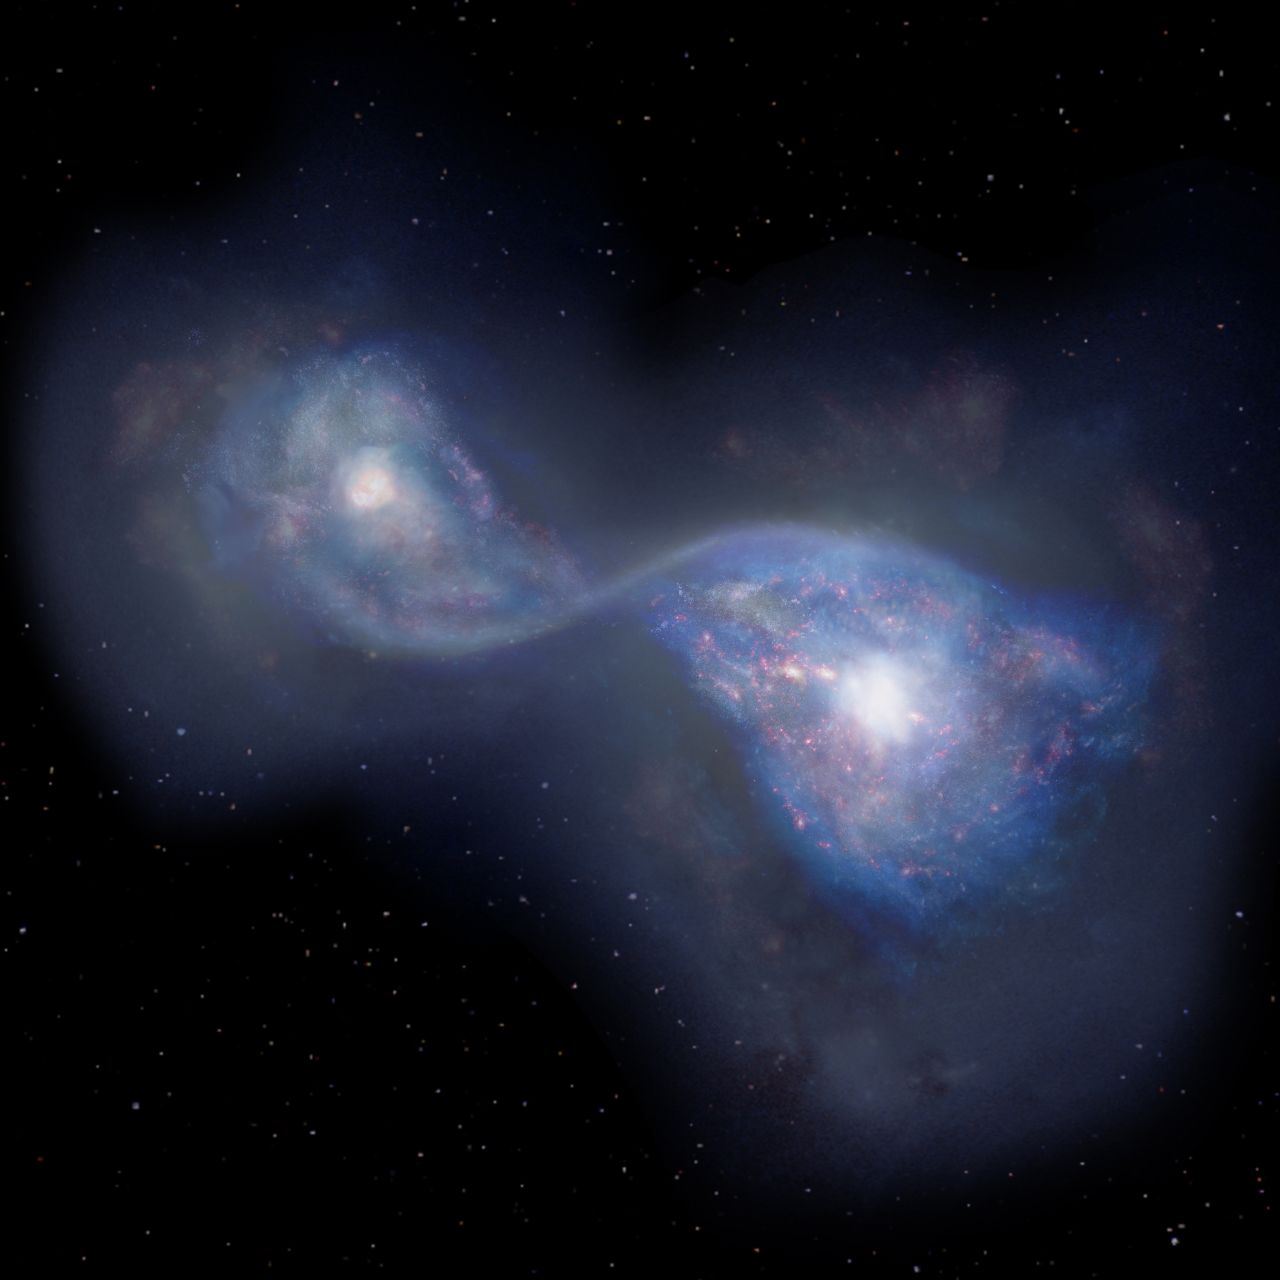 Artist's impression of the merging galaxies B14-65666 located 13 billion light years-away.